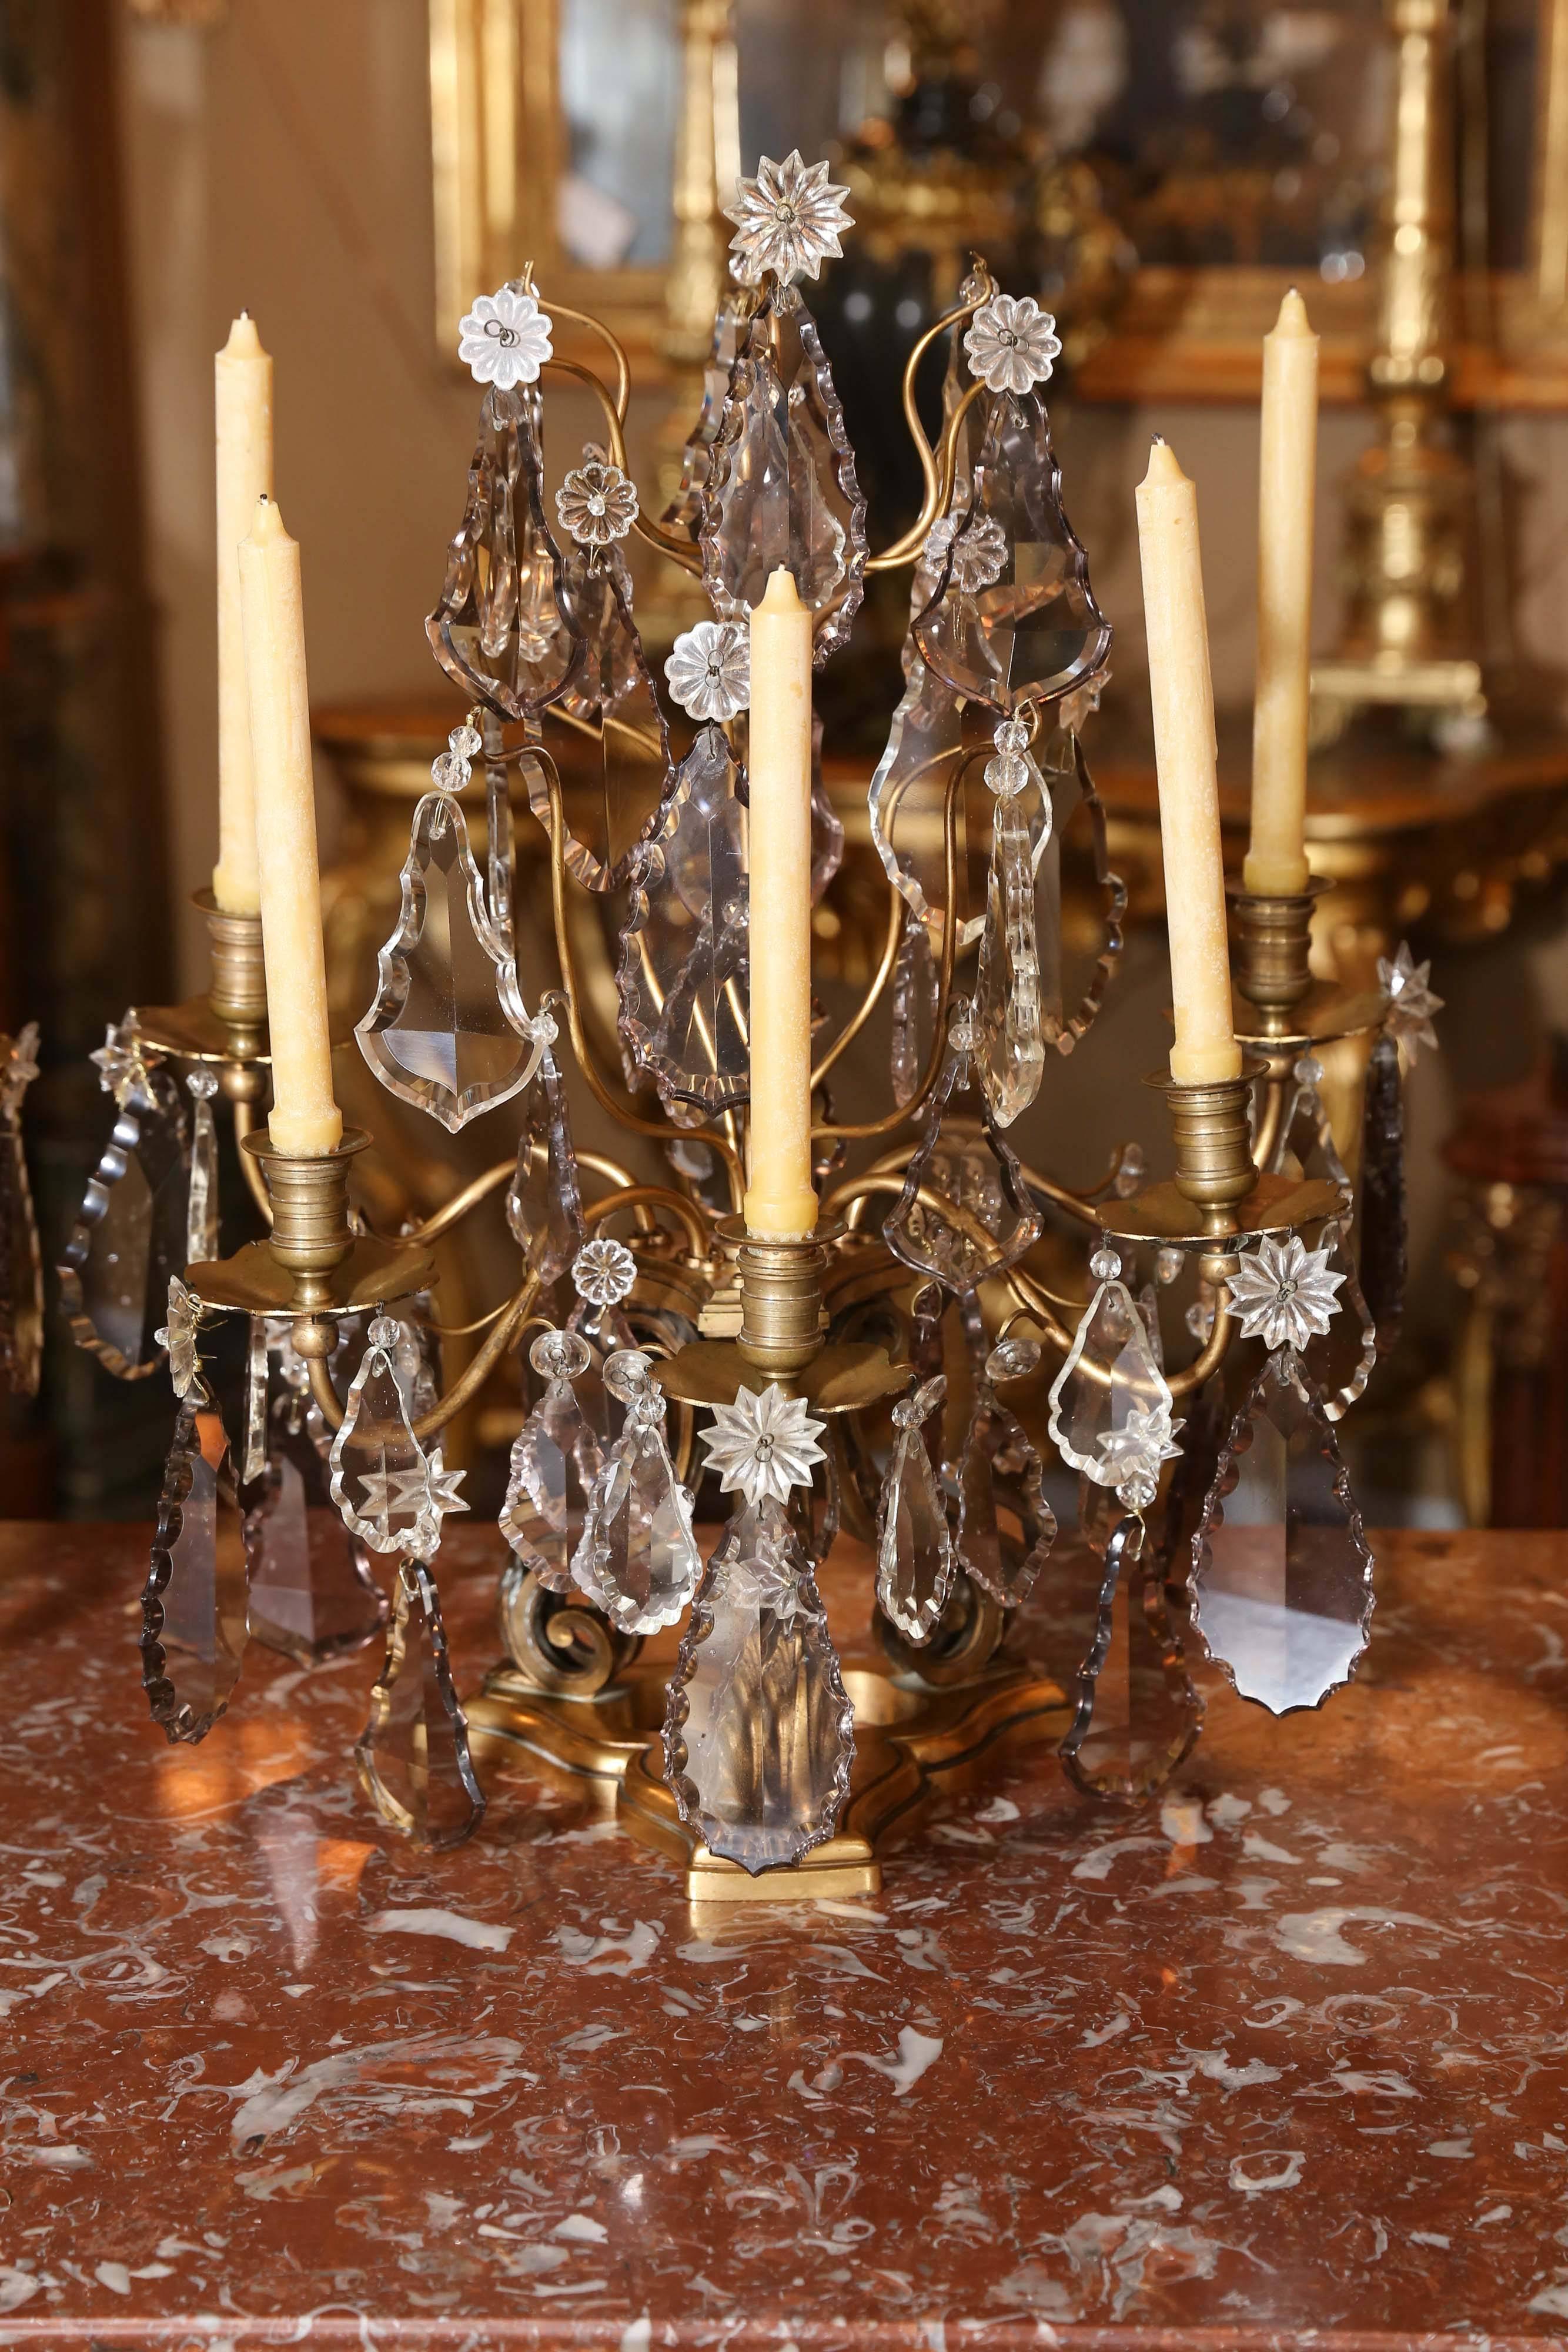 Pair of exquisite bronze and crystal girondles with five candles on each.
French 19th century; the crystal is beautiful without chips and none are missing 
Having a scrolled base and graceful scrolled arms that support the candleholders.
 